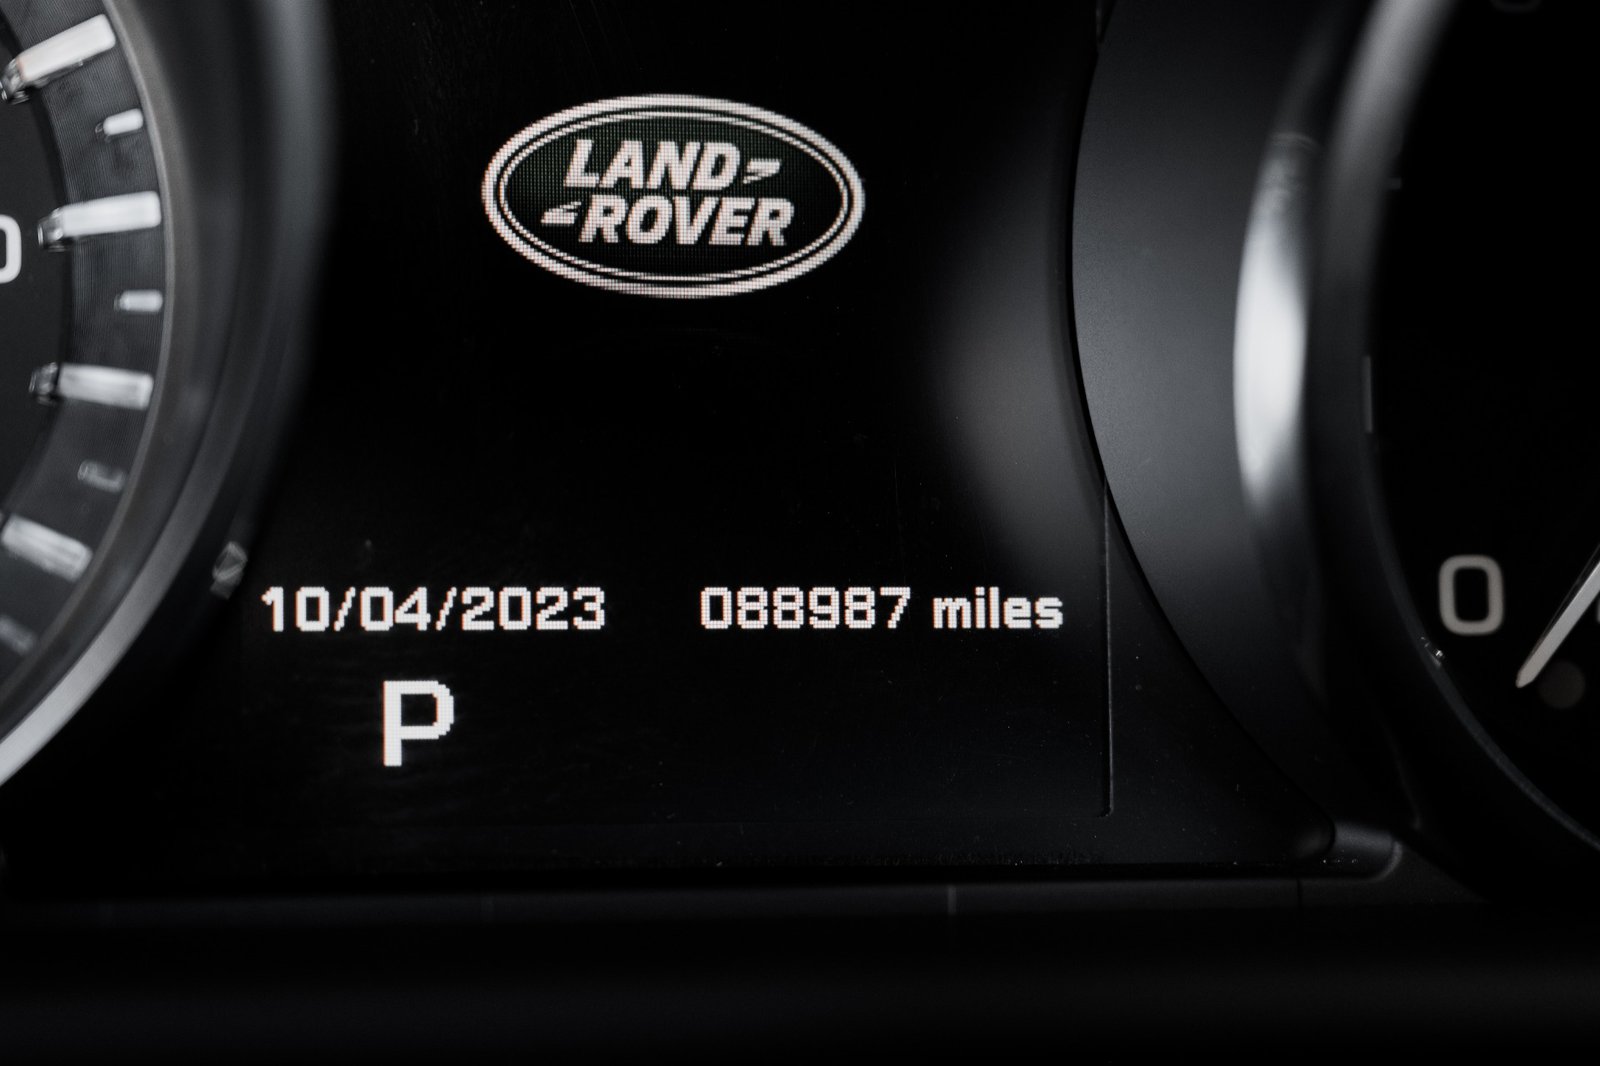 Used 2014 Land Rover Range Rover Sport 30L V6 Supercharged HSE (30)